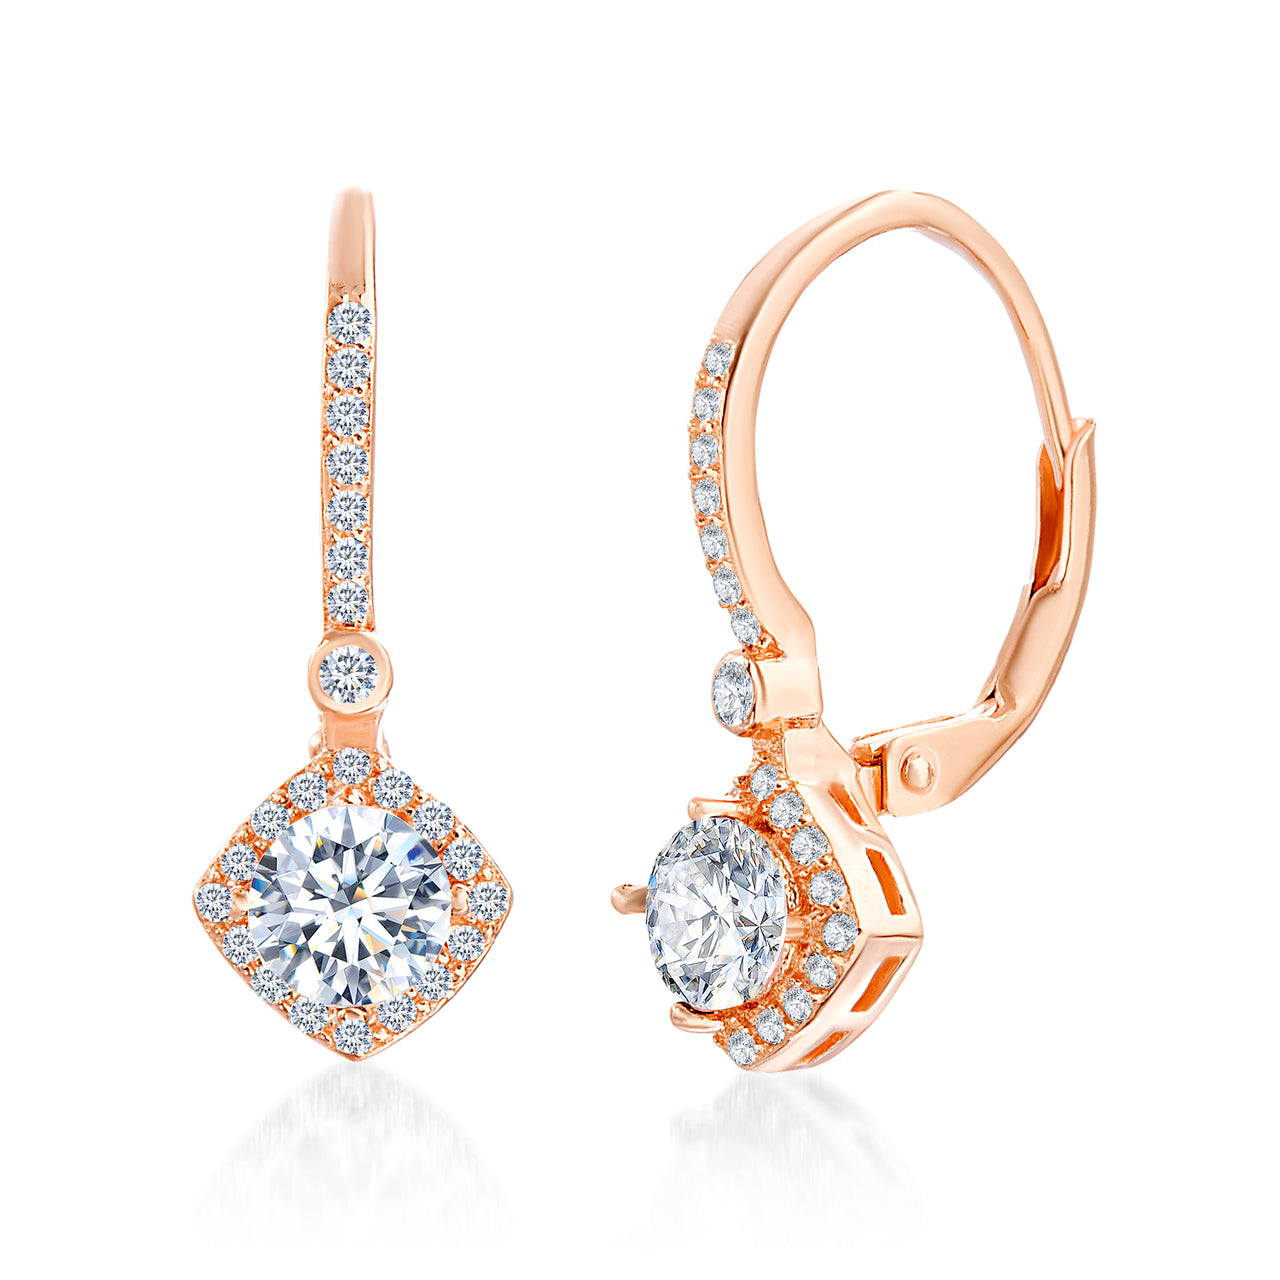 Lesa Michele Rose Gold Plated Sterling Silver and Cubic Zirconia Leverback Drop Earrings